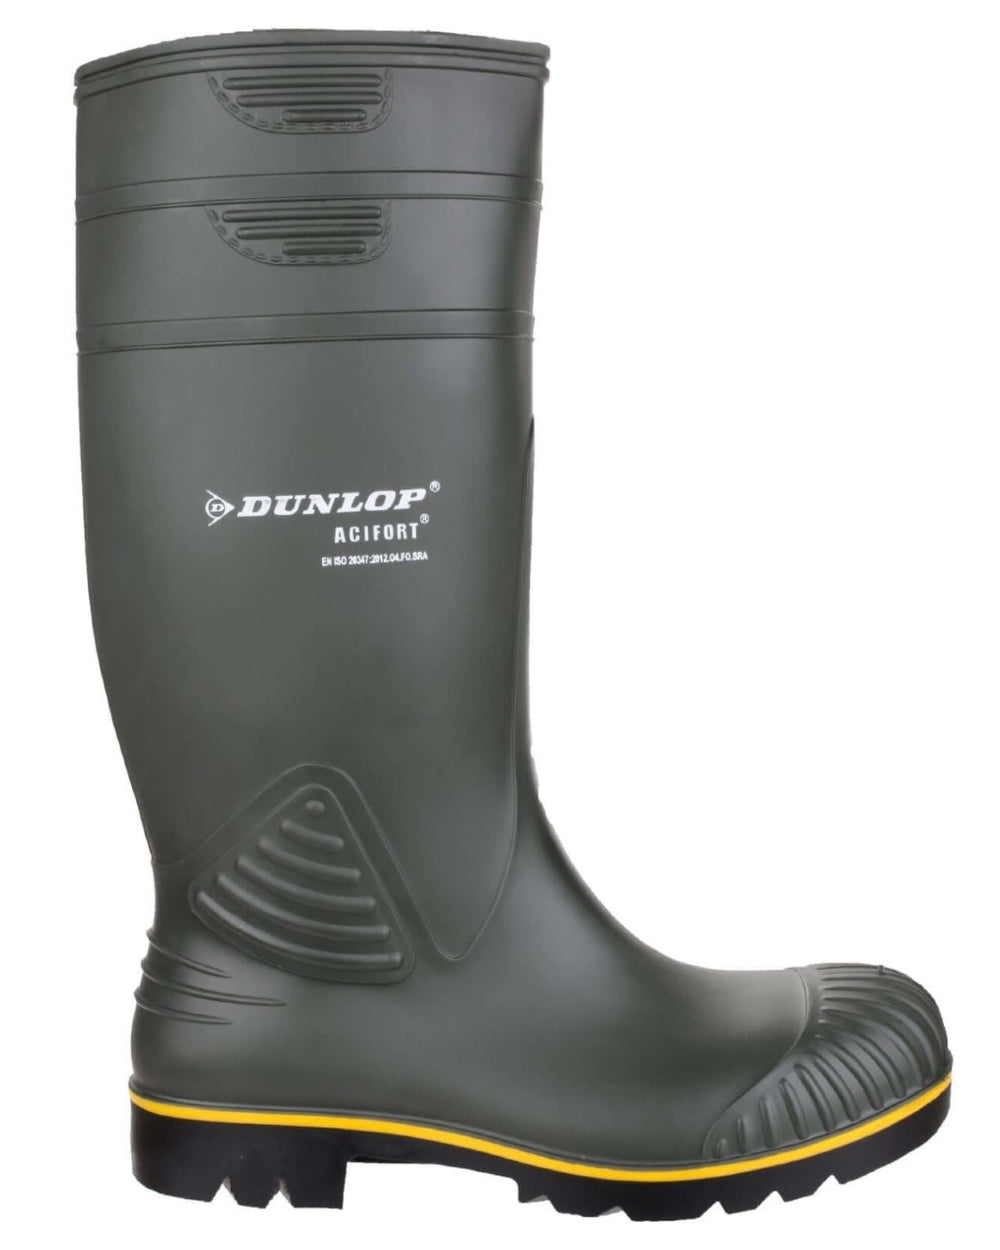 Green coloured Dunlop Acifort Heavy Duty Non Safety Wellingtons on white background 